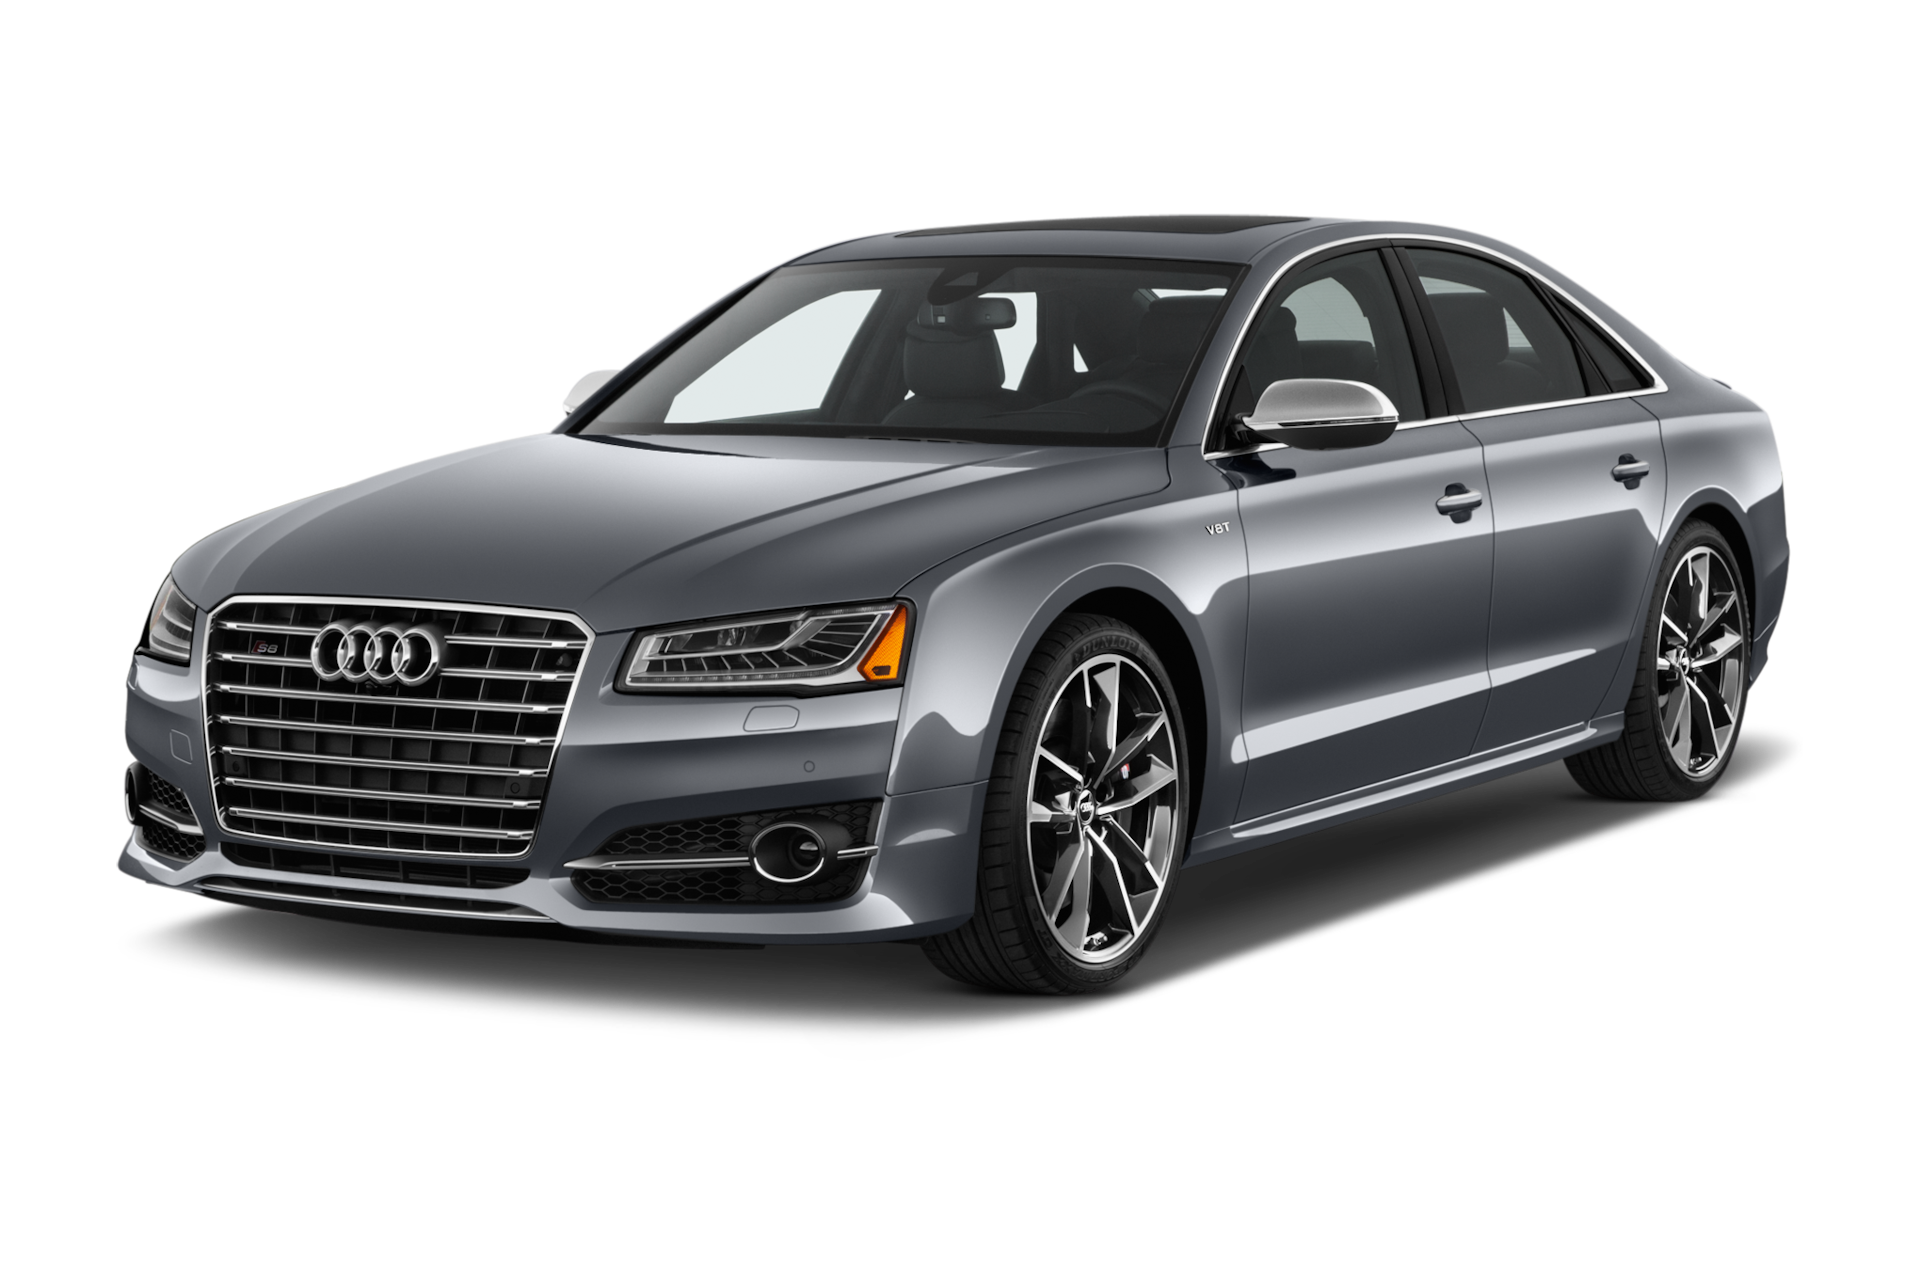 2016 Audi S8 Prices, Reviews, and Photos - MotorTrend